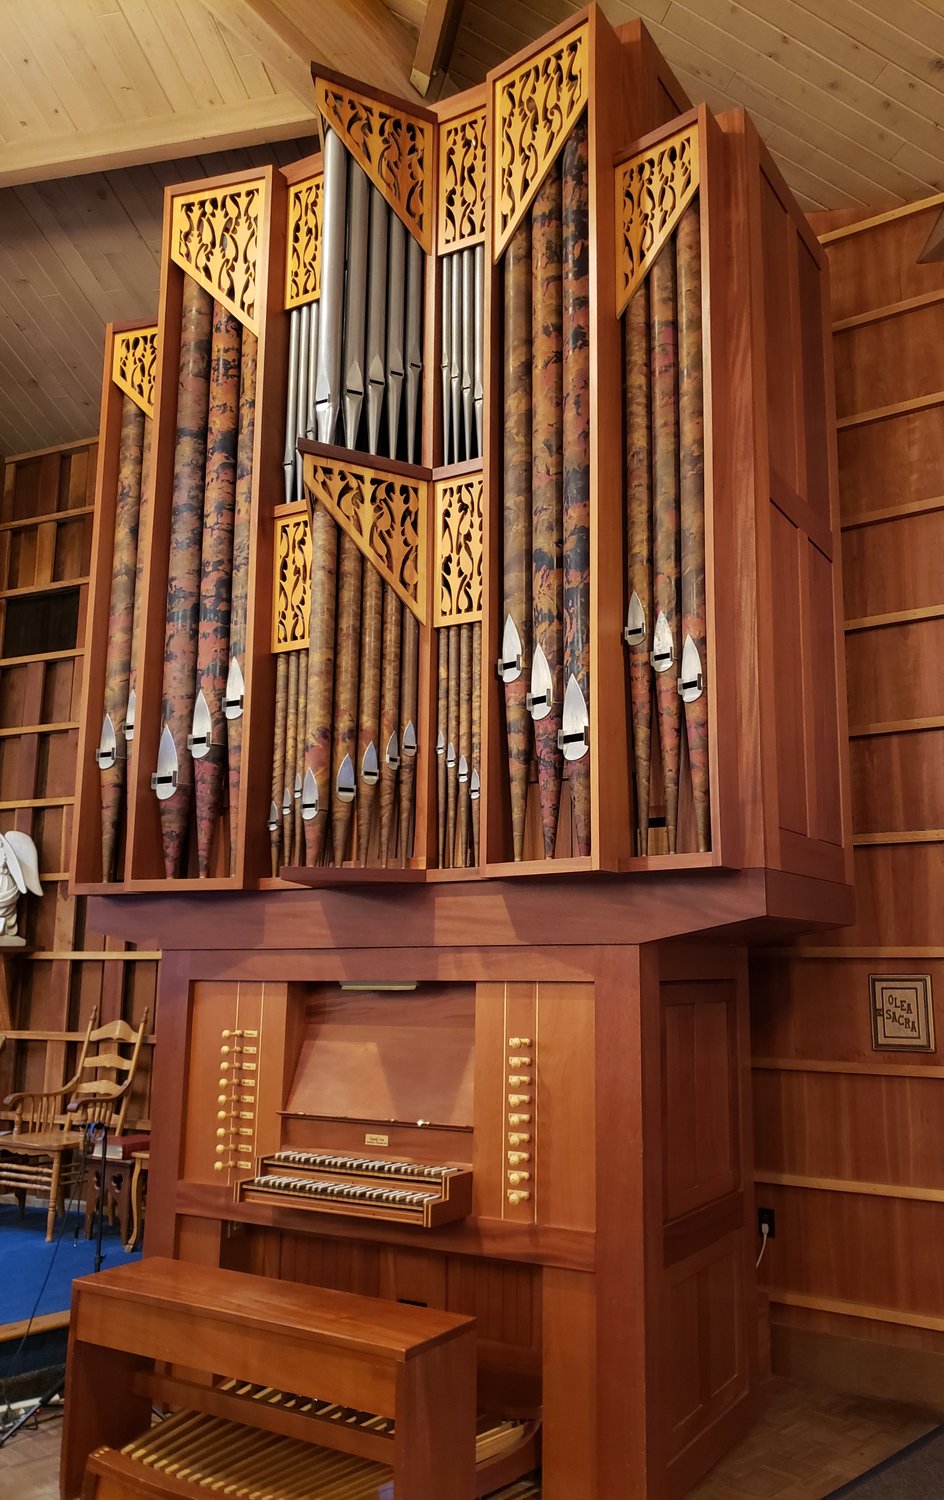 The organ in St. Clement Church in St. Clement was built in Ireland and installed in 1983.